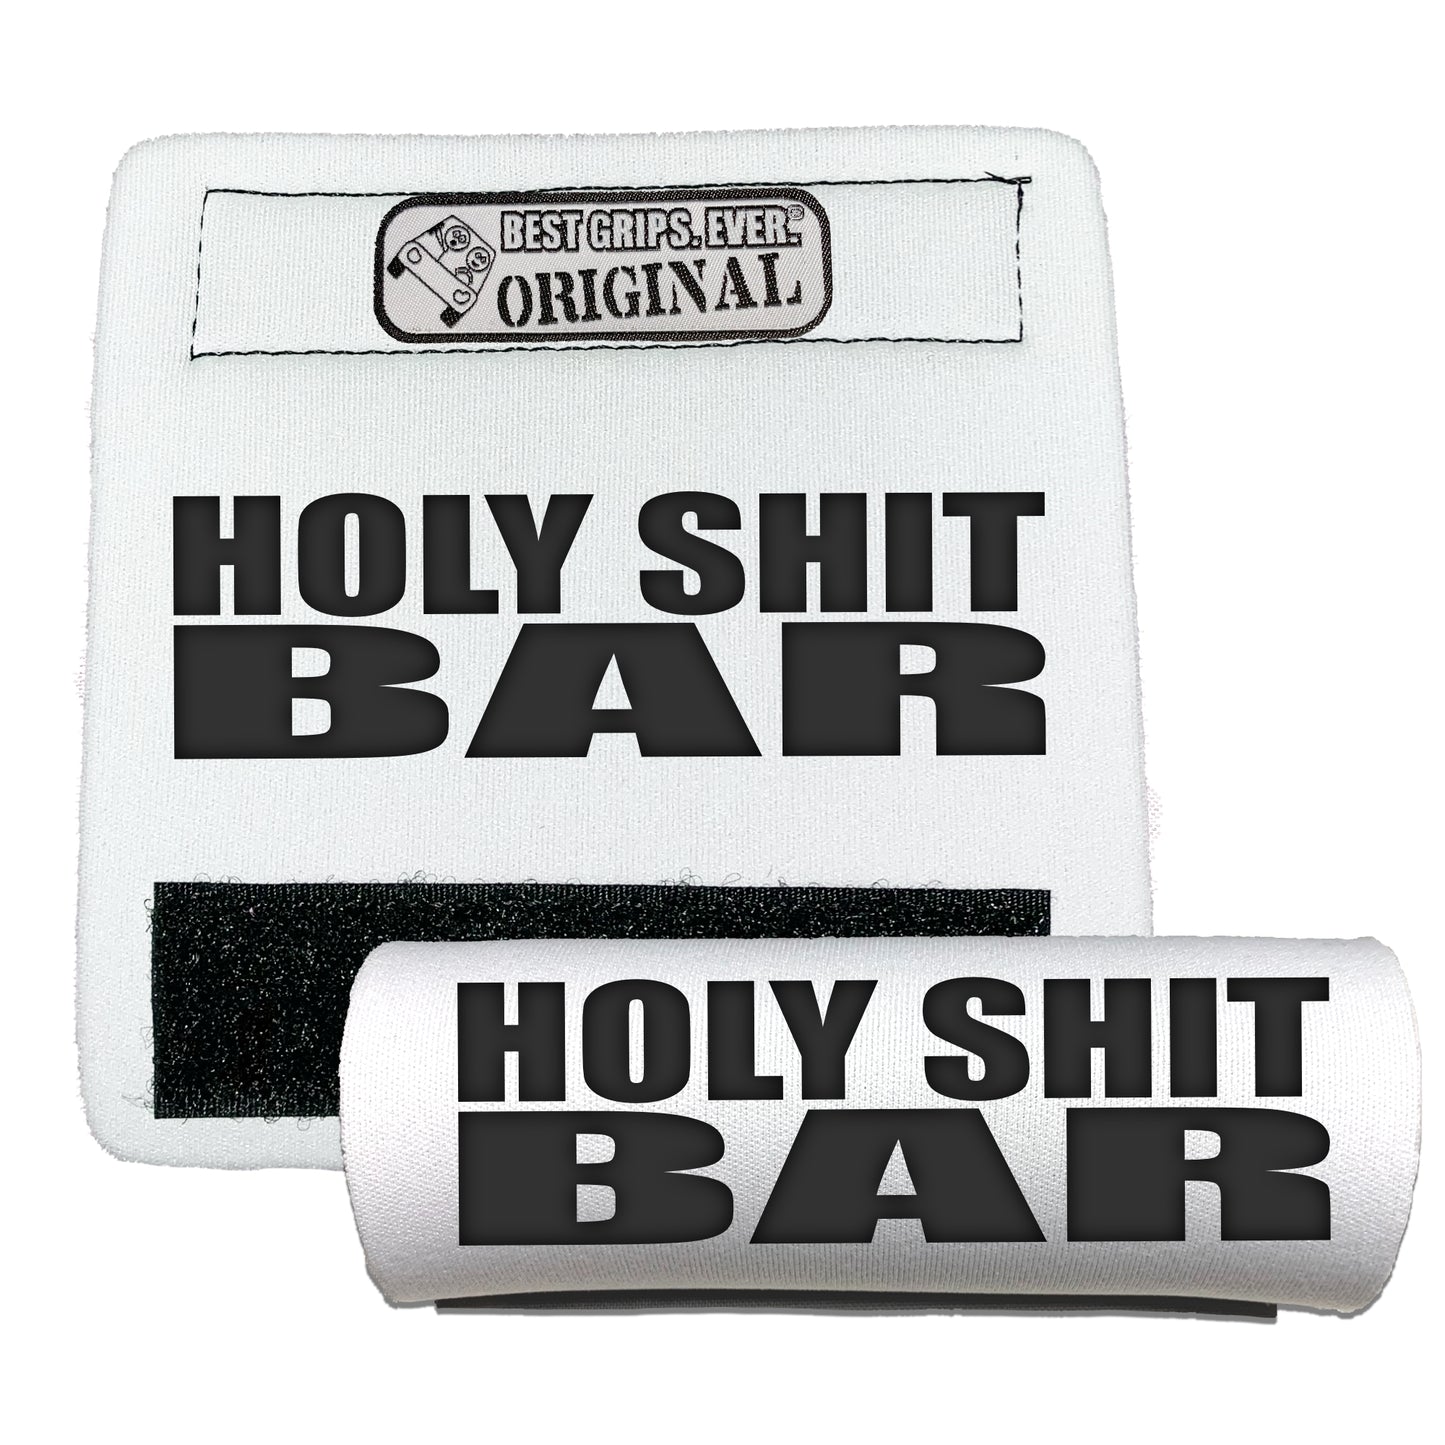 The Holy Shit Bar® - BEST GRIPS. EVER.®